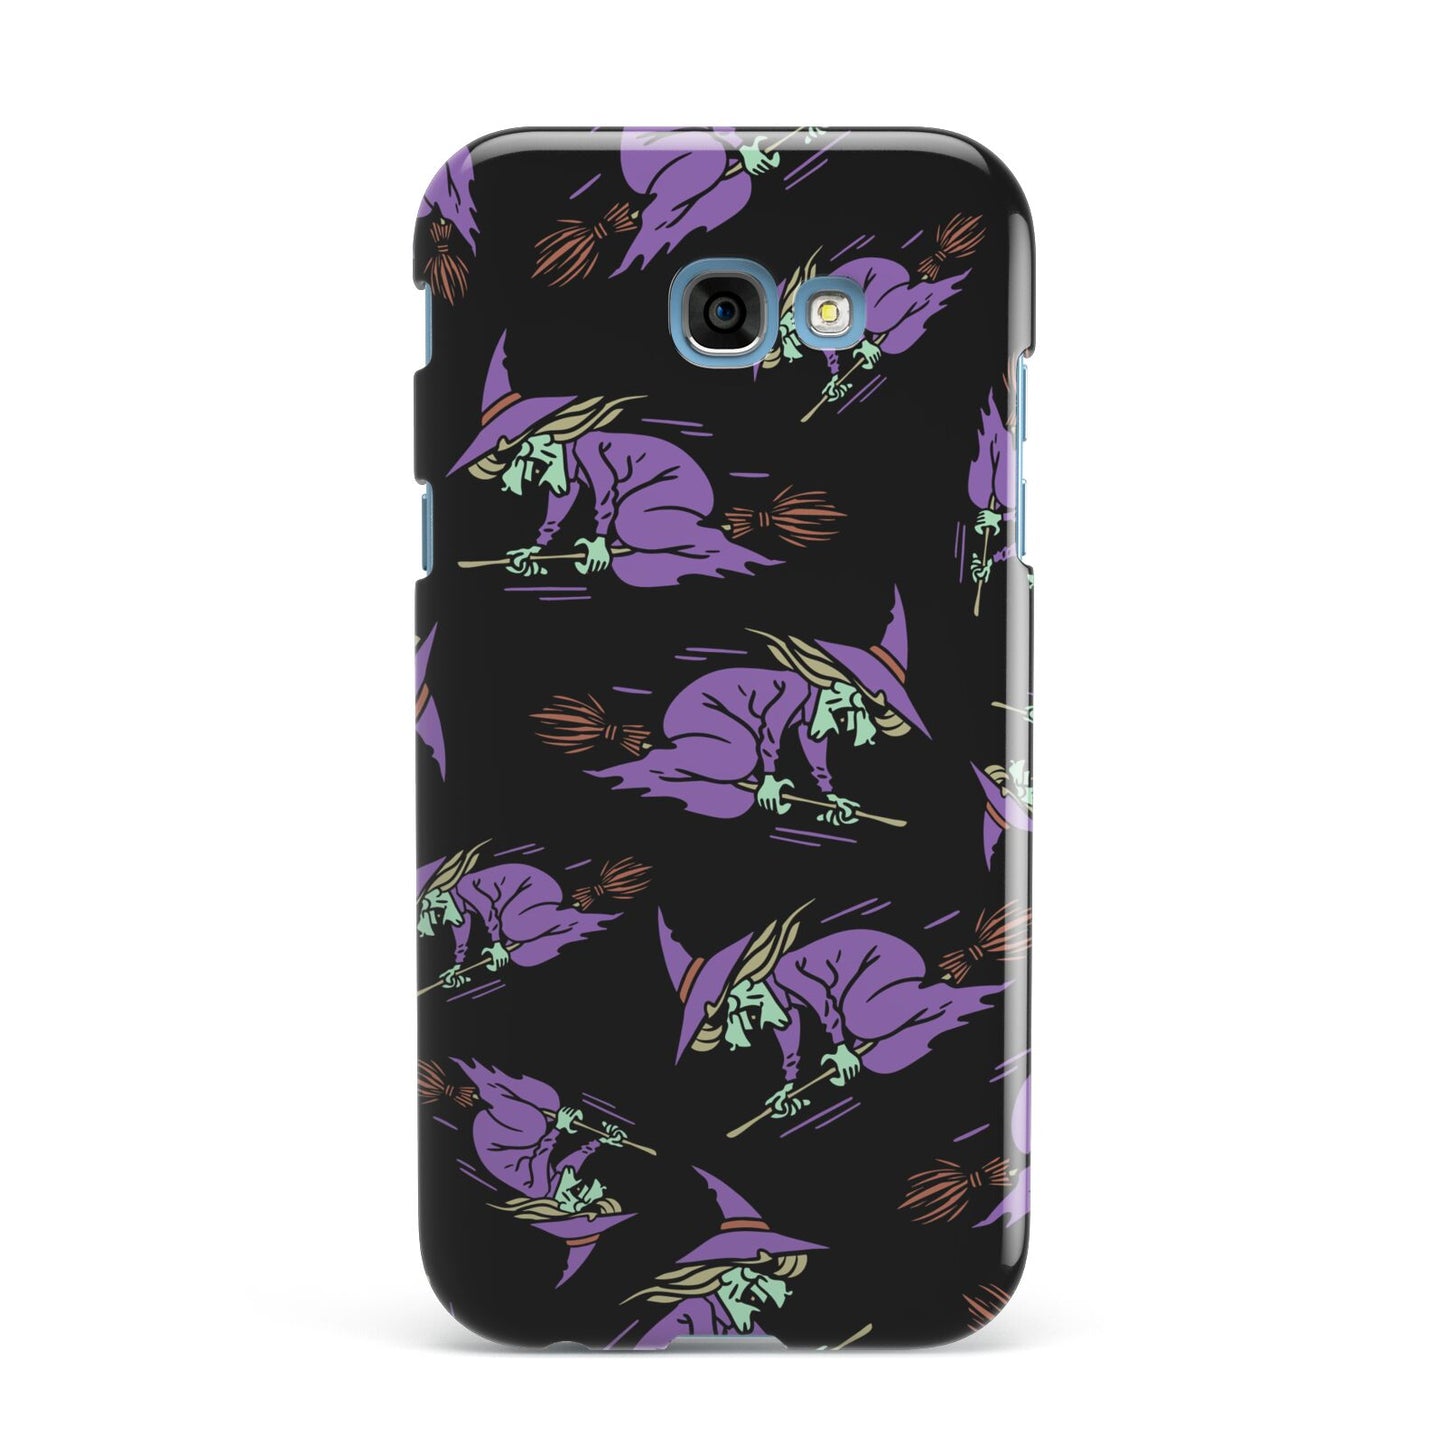 Flying Witches Samsung Galaxy A7 2017 Case